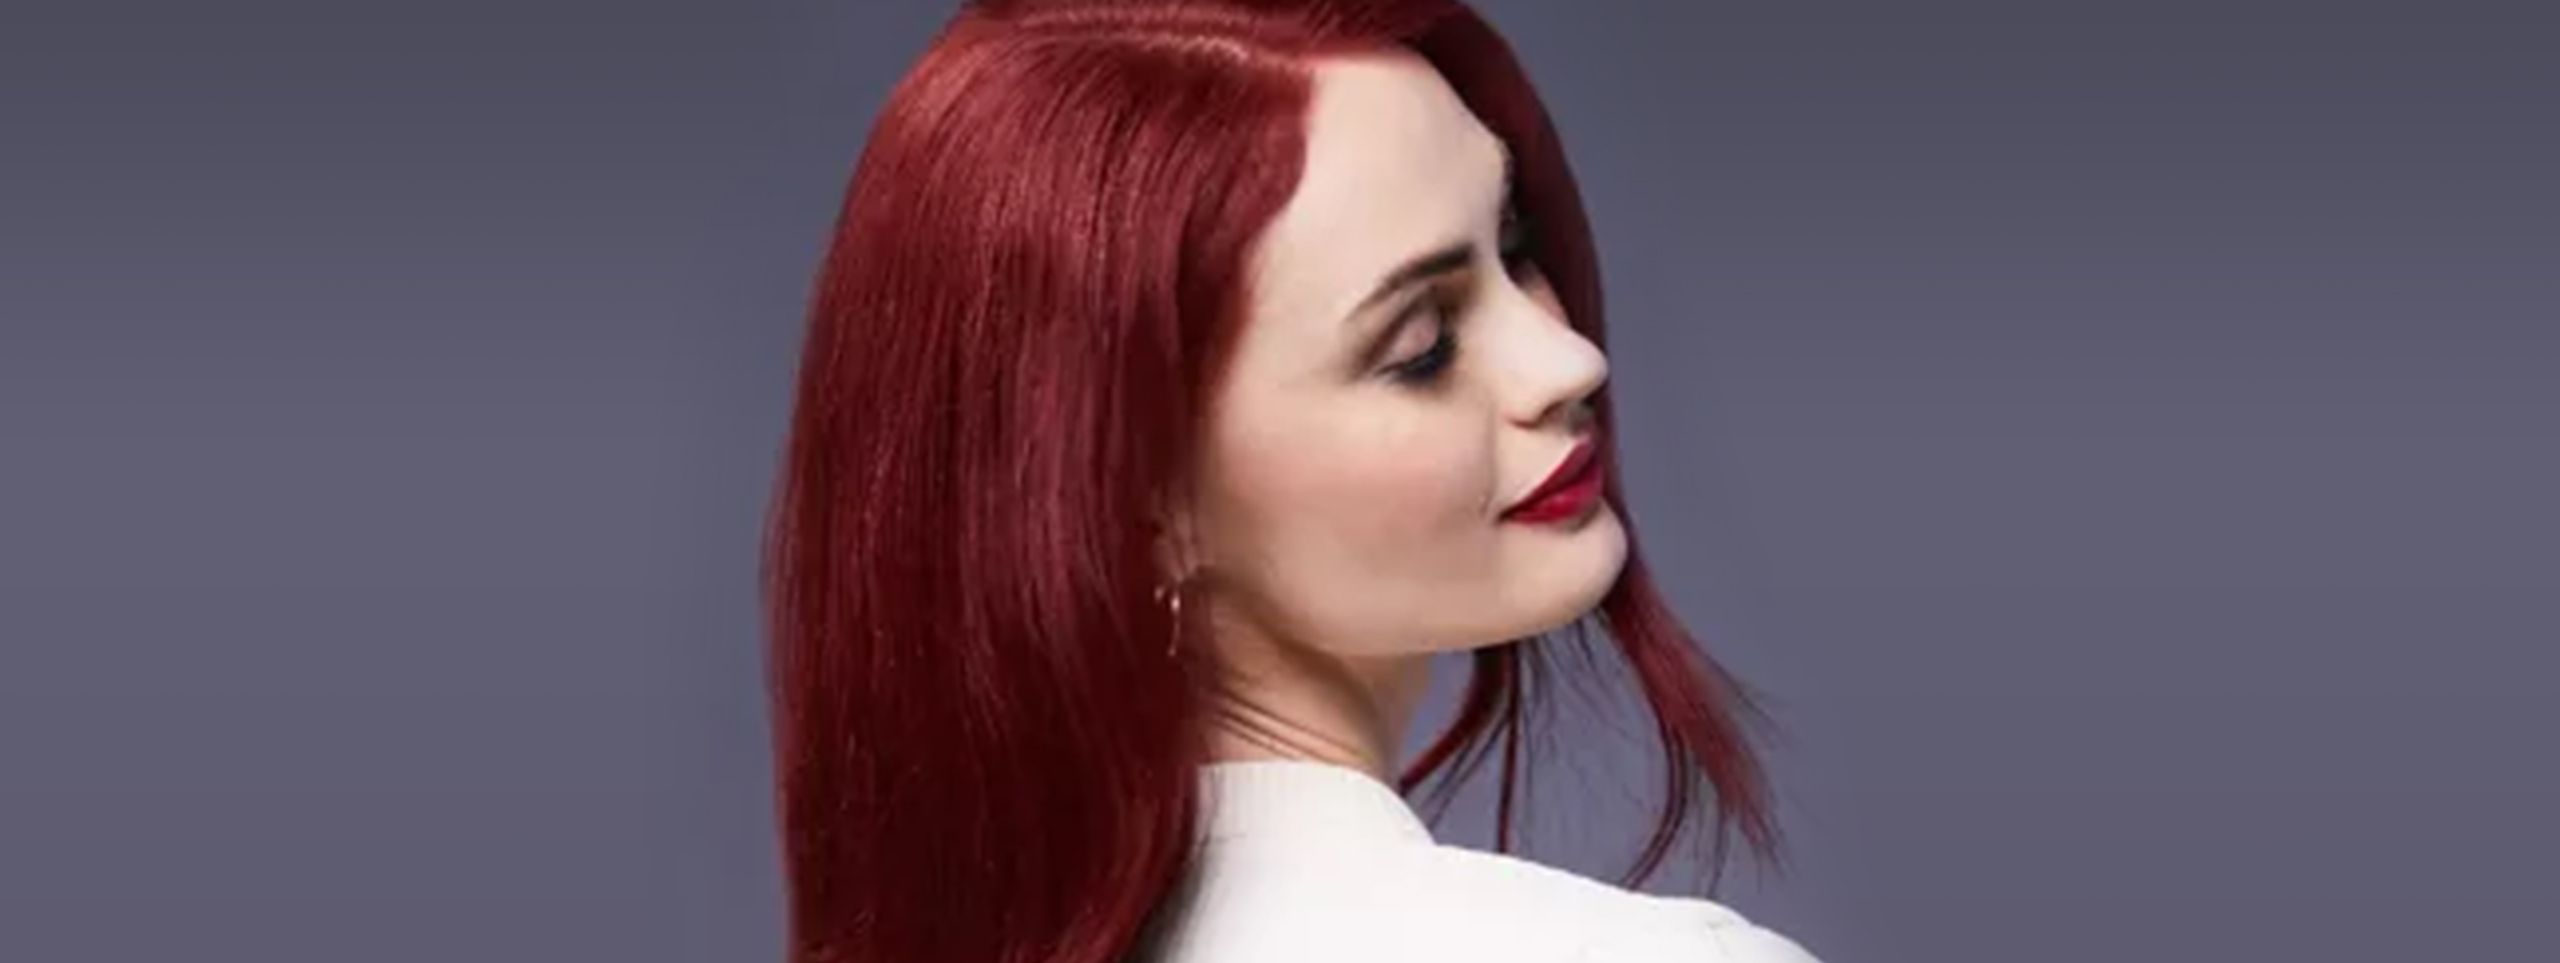 Woman with red velvet hair color